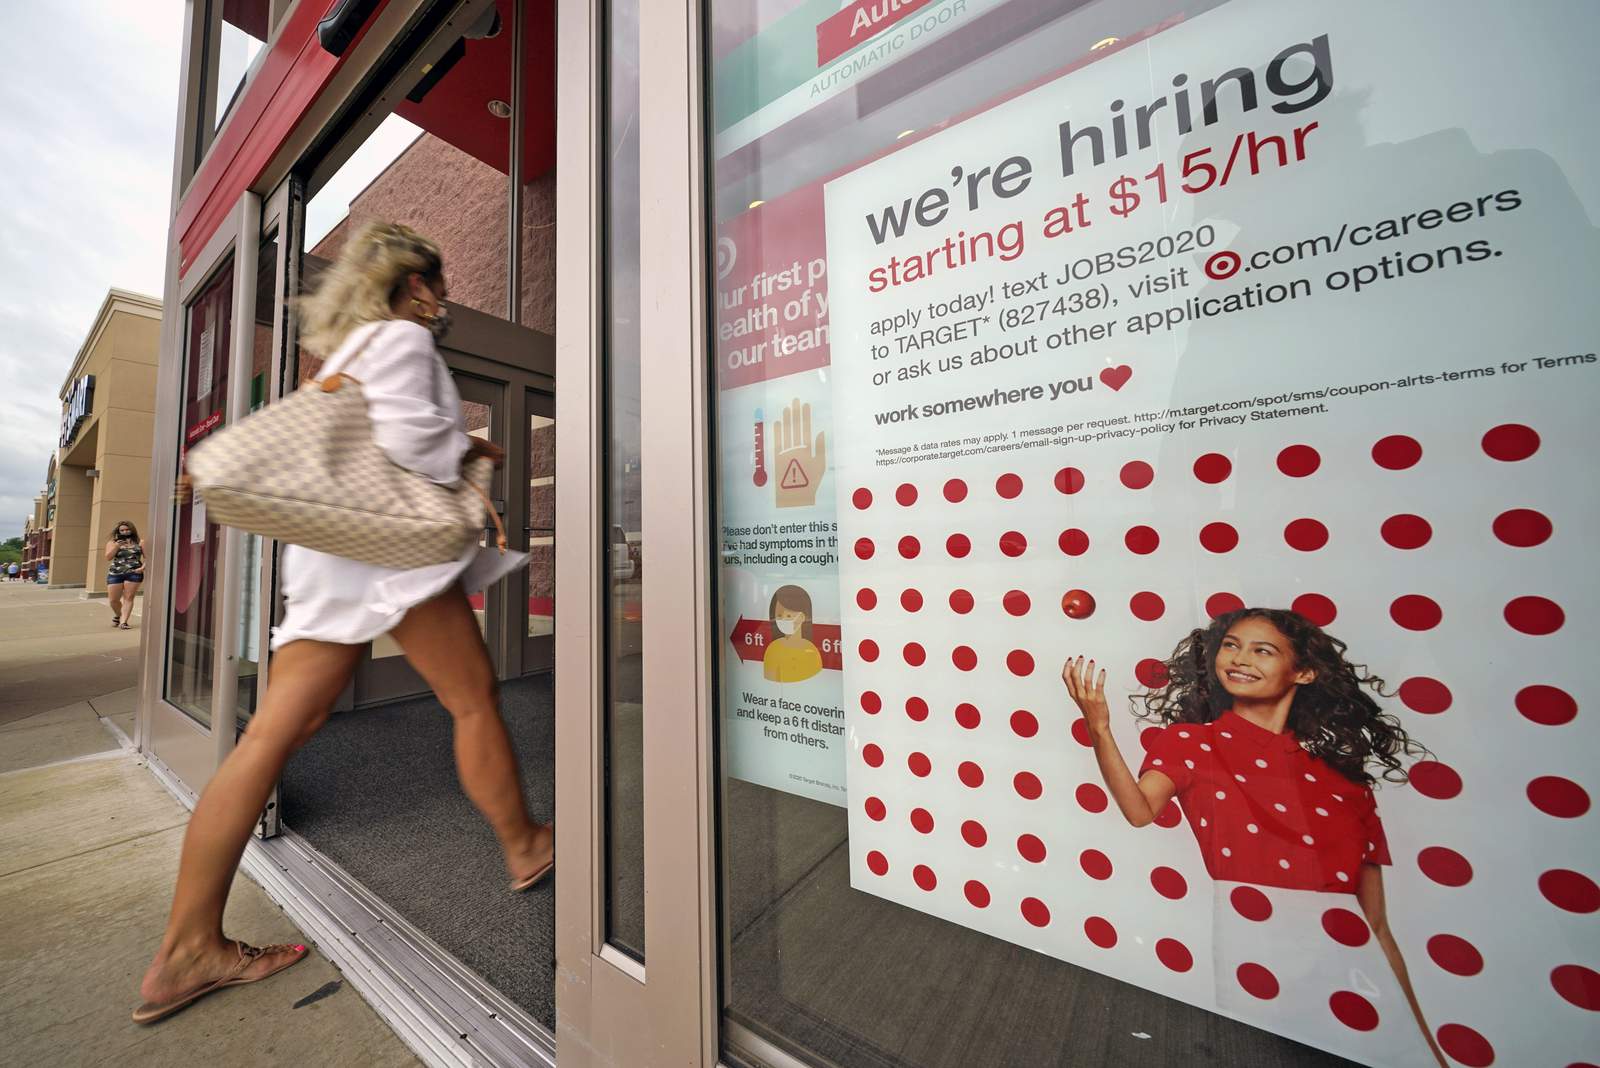 US jobless claims fall by 33,000 but remain historically high amid pandemic